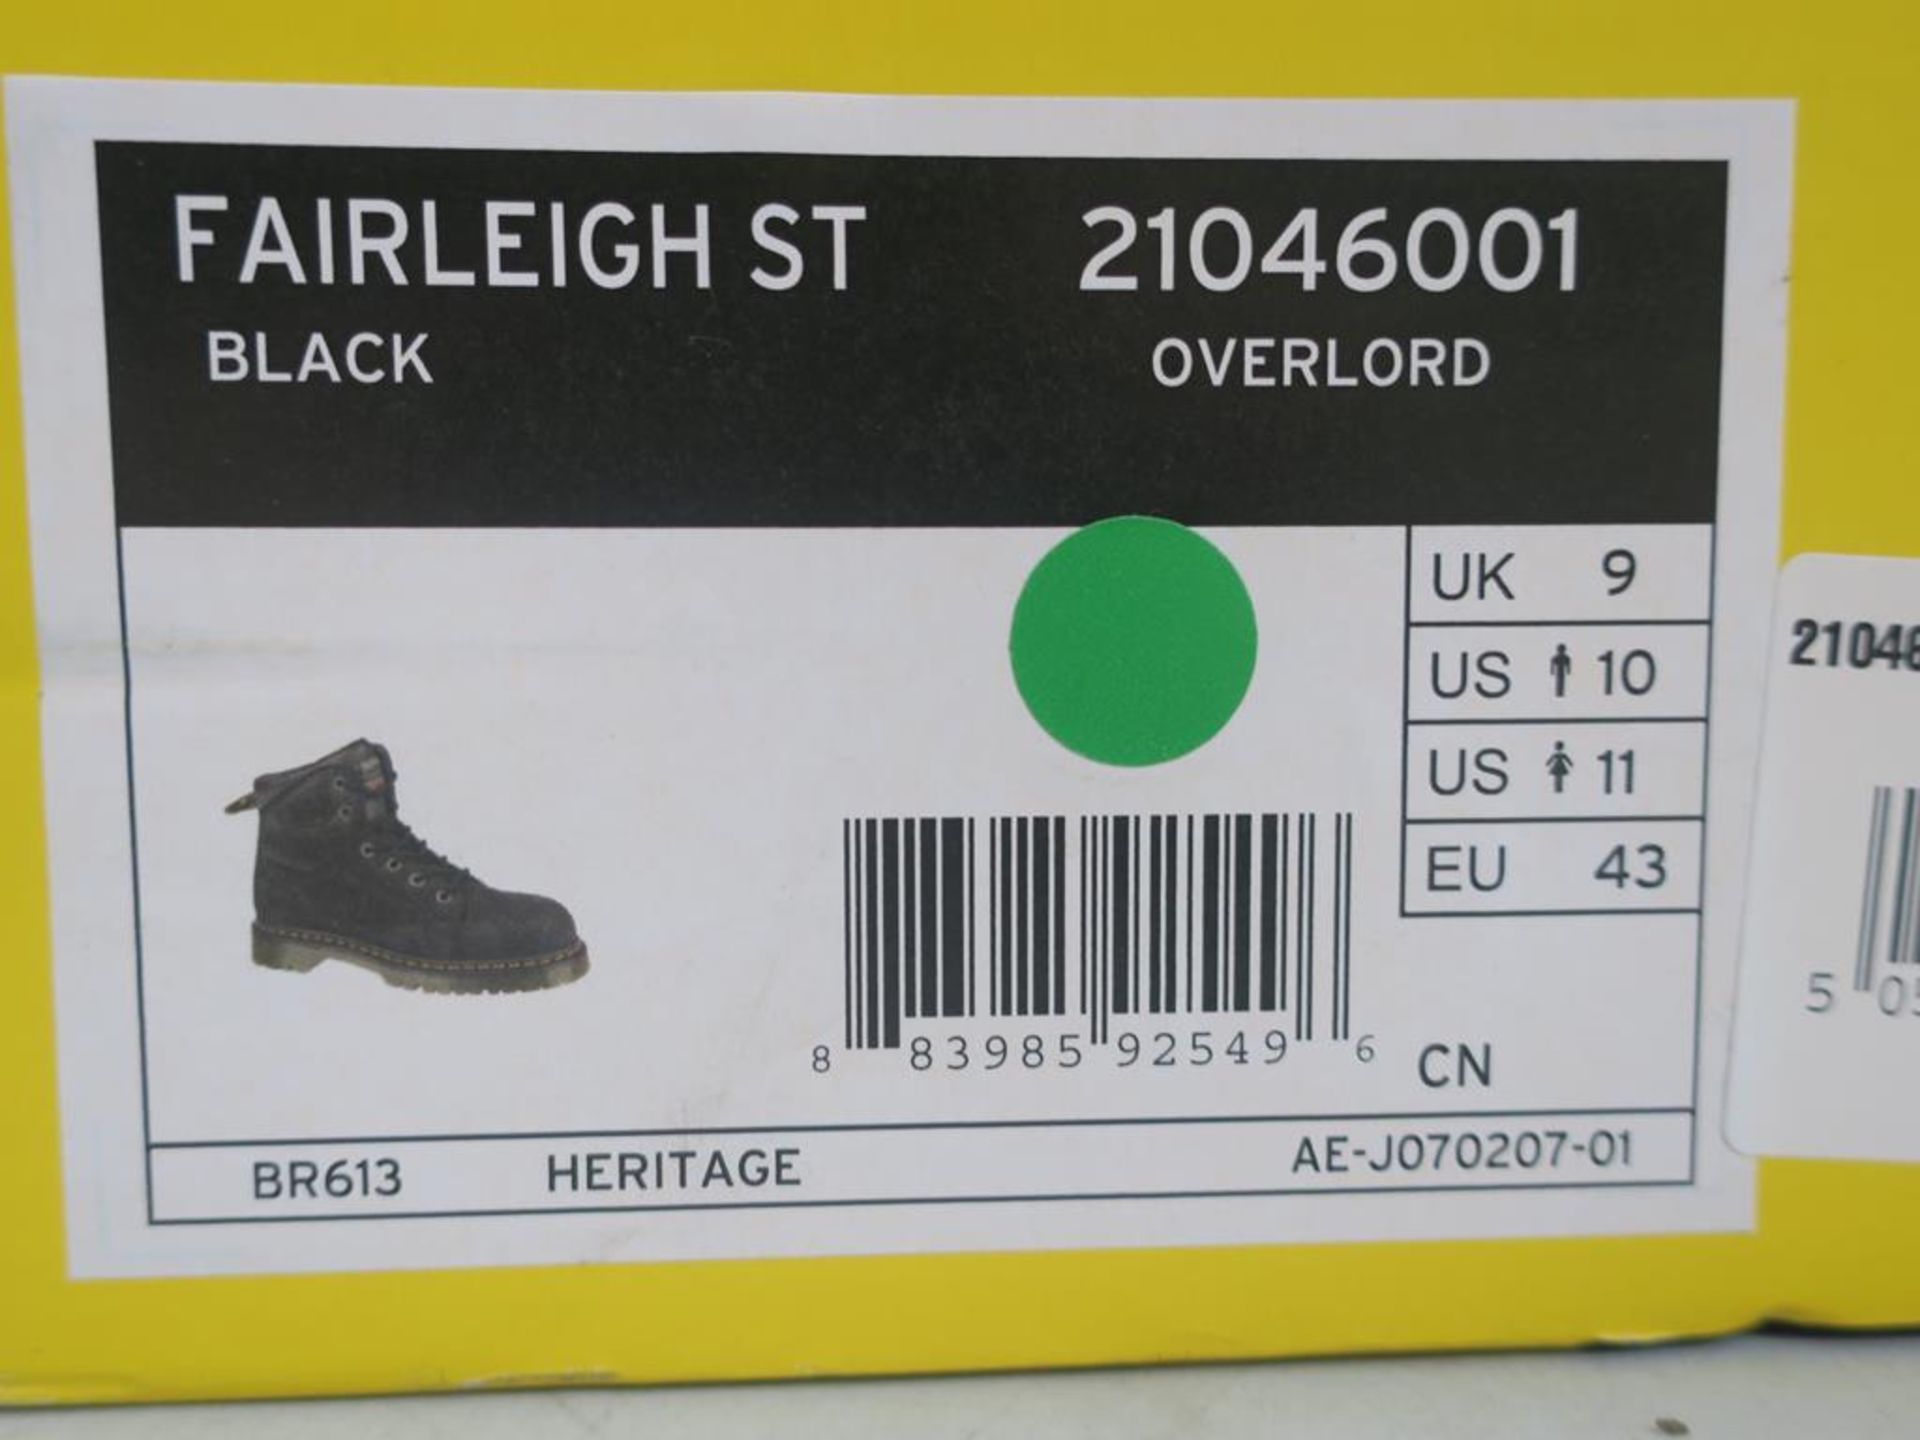 * A pair of New/Boxed Dr Martens Boots, Fairleigh ST, 21046001, Overlord in black, UK size 9 - Image 3 of 3